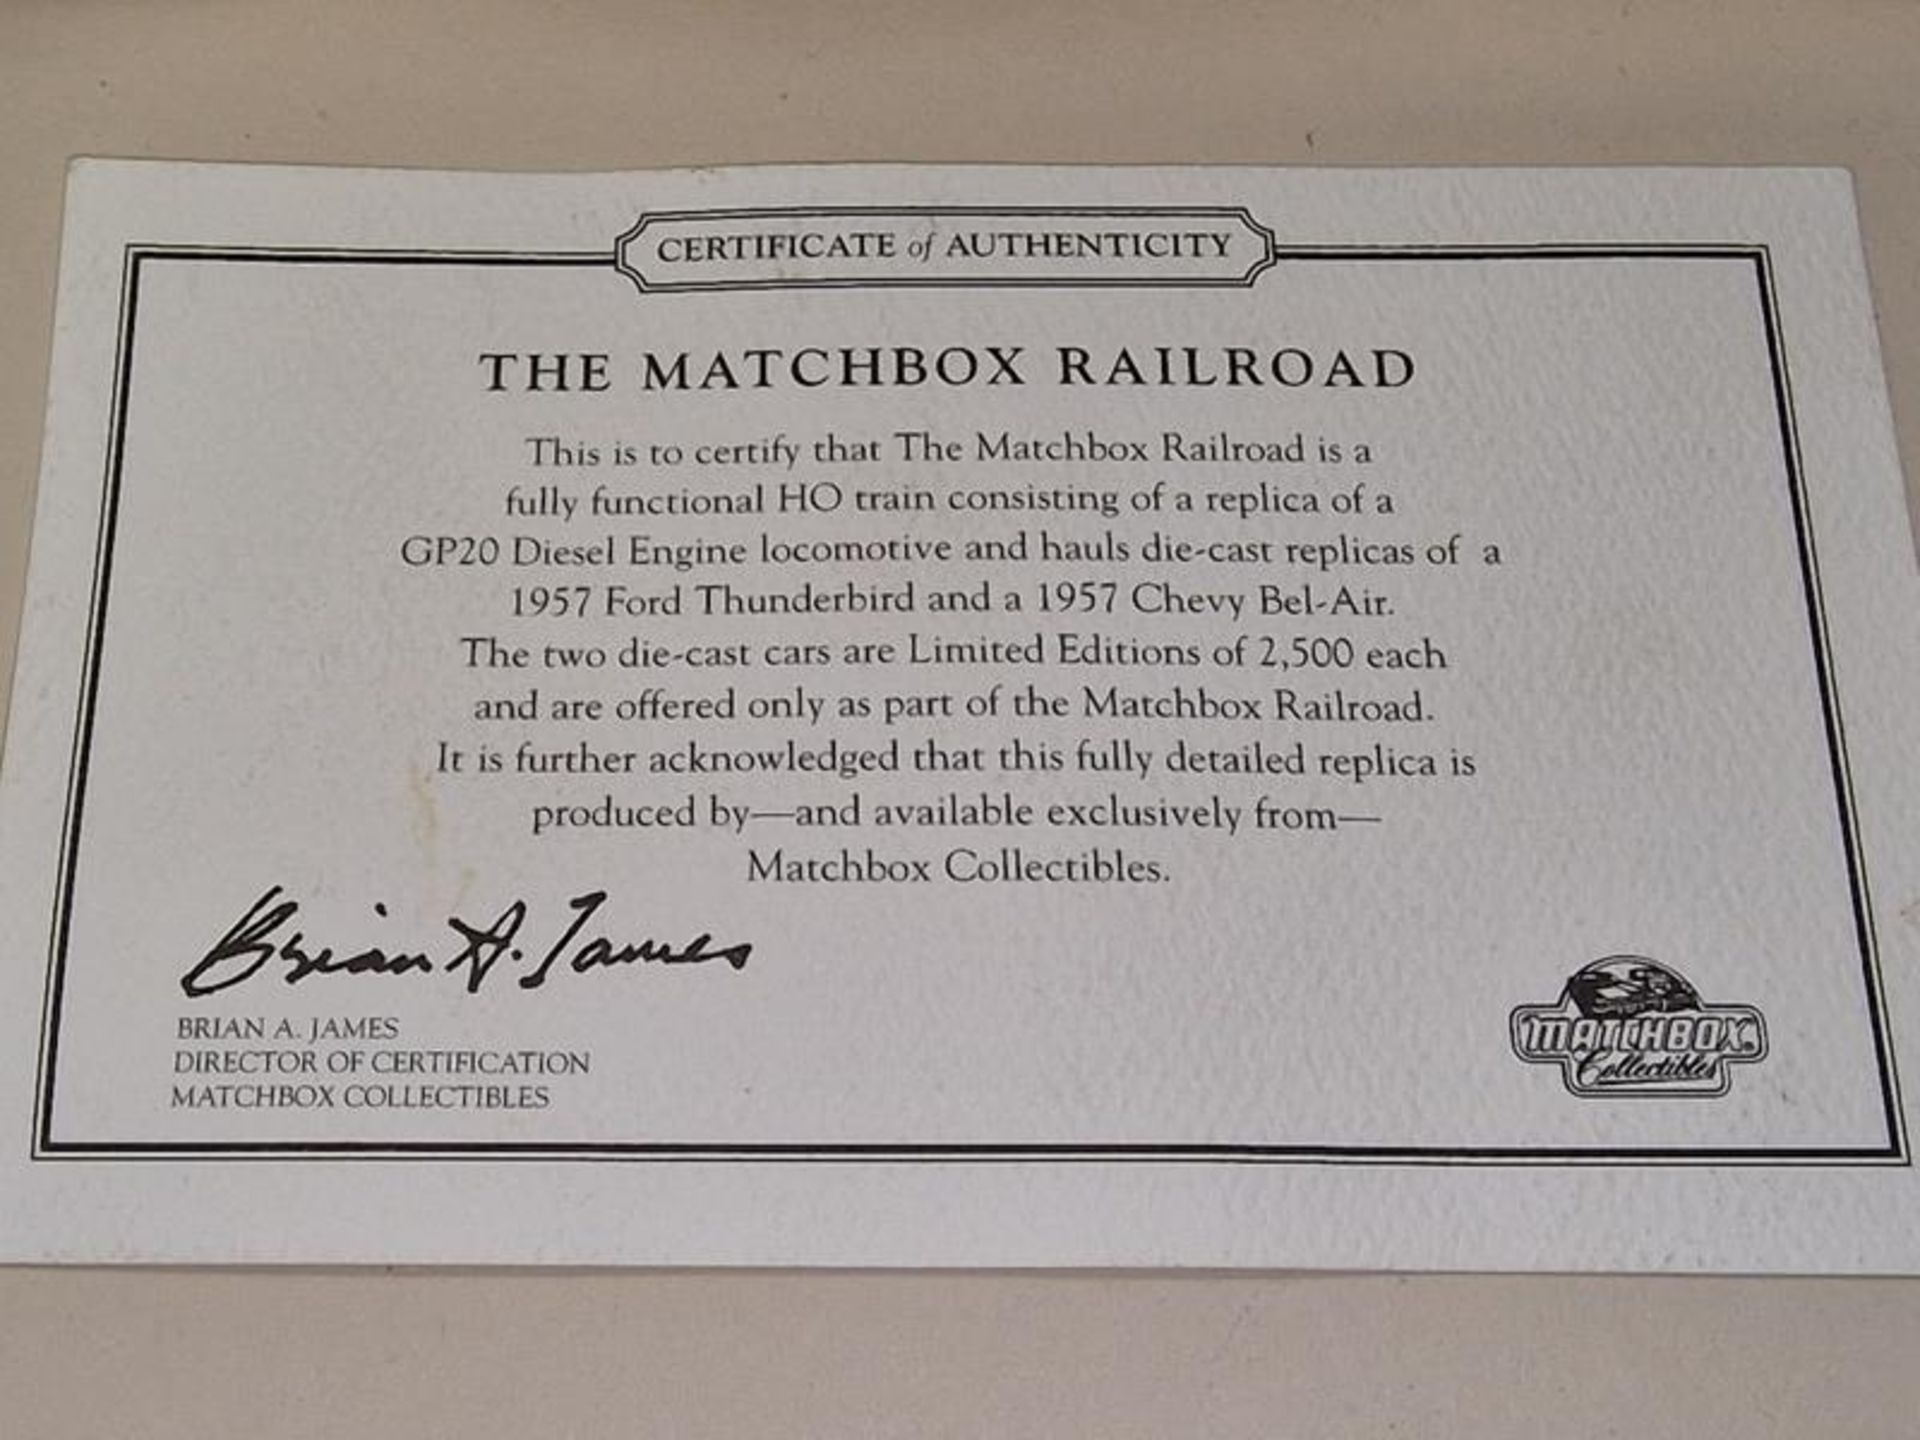 Matchbox Railroad HO Gauge electric train set in excellent condition with certificate. - Image 3 of 4